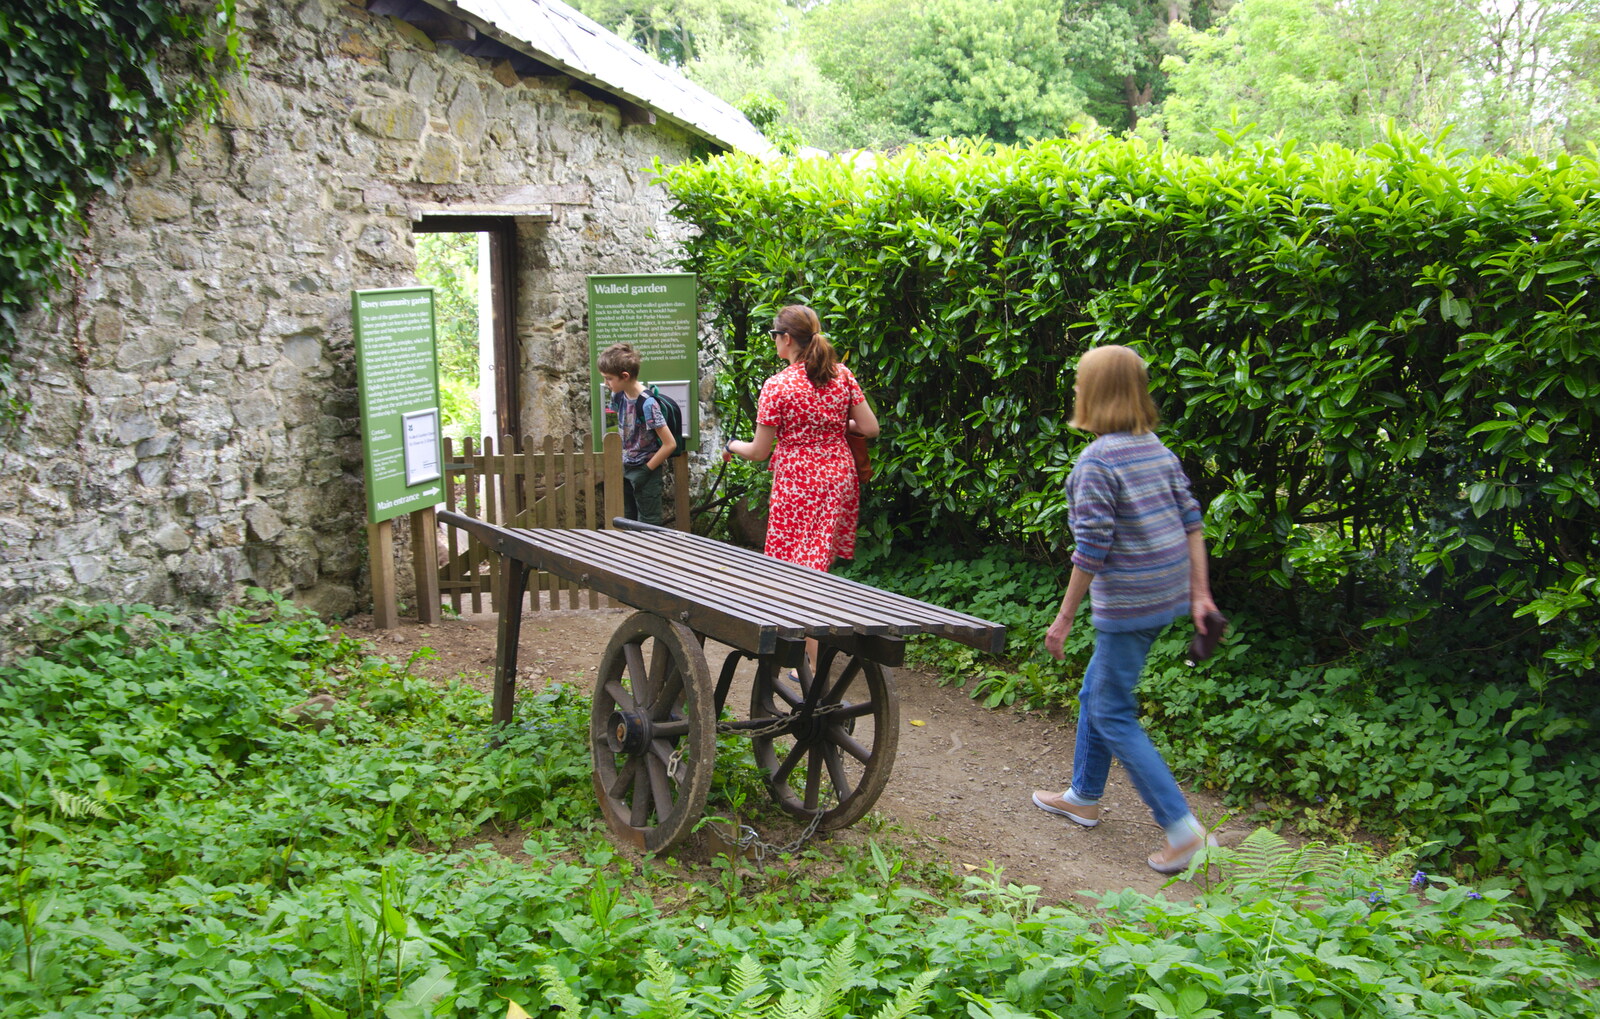 Chagford Lido and a Trip to Parke, Bovey Tracey, Devon - 25th May 2019: We visit the walled garden